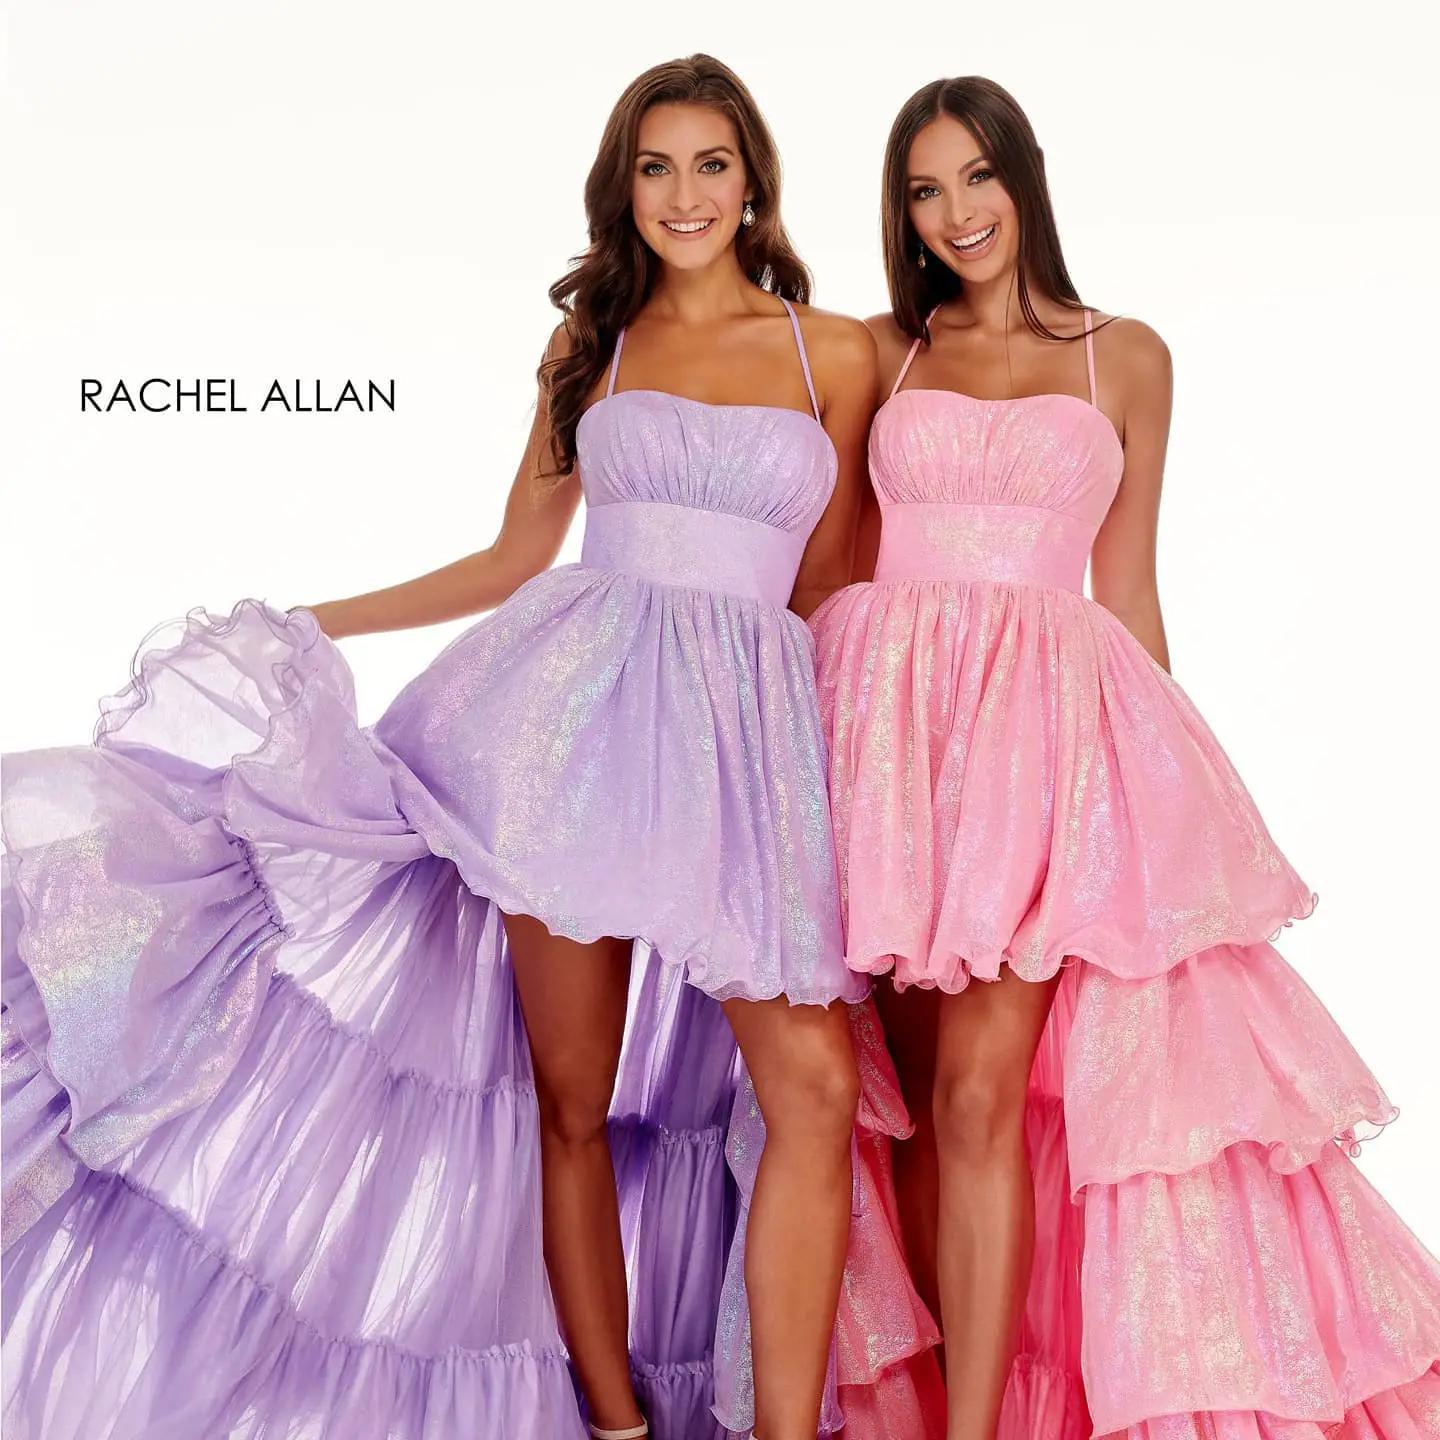 Models wearing a color gowns. Mobile image